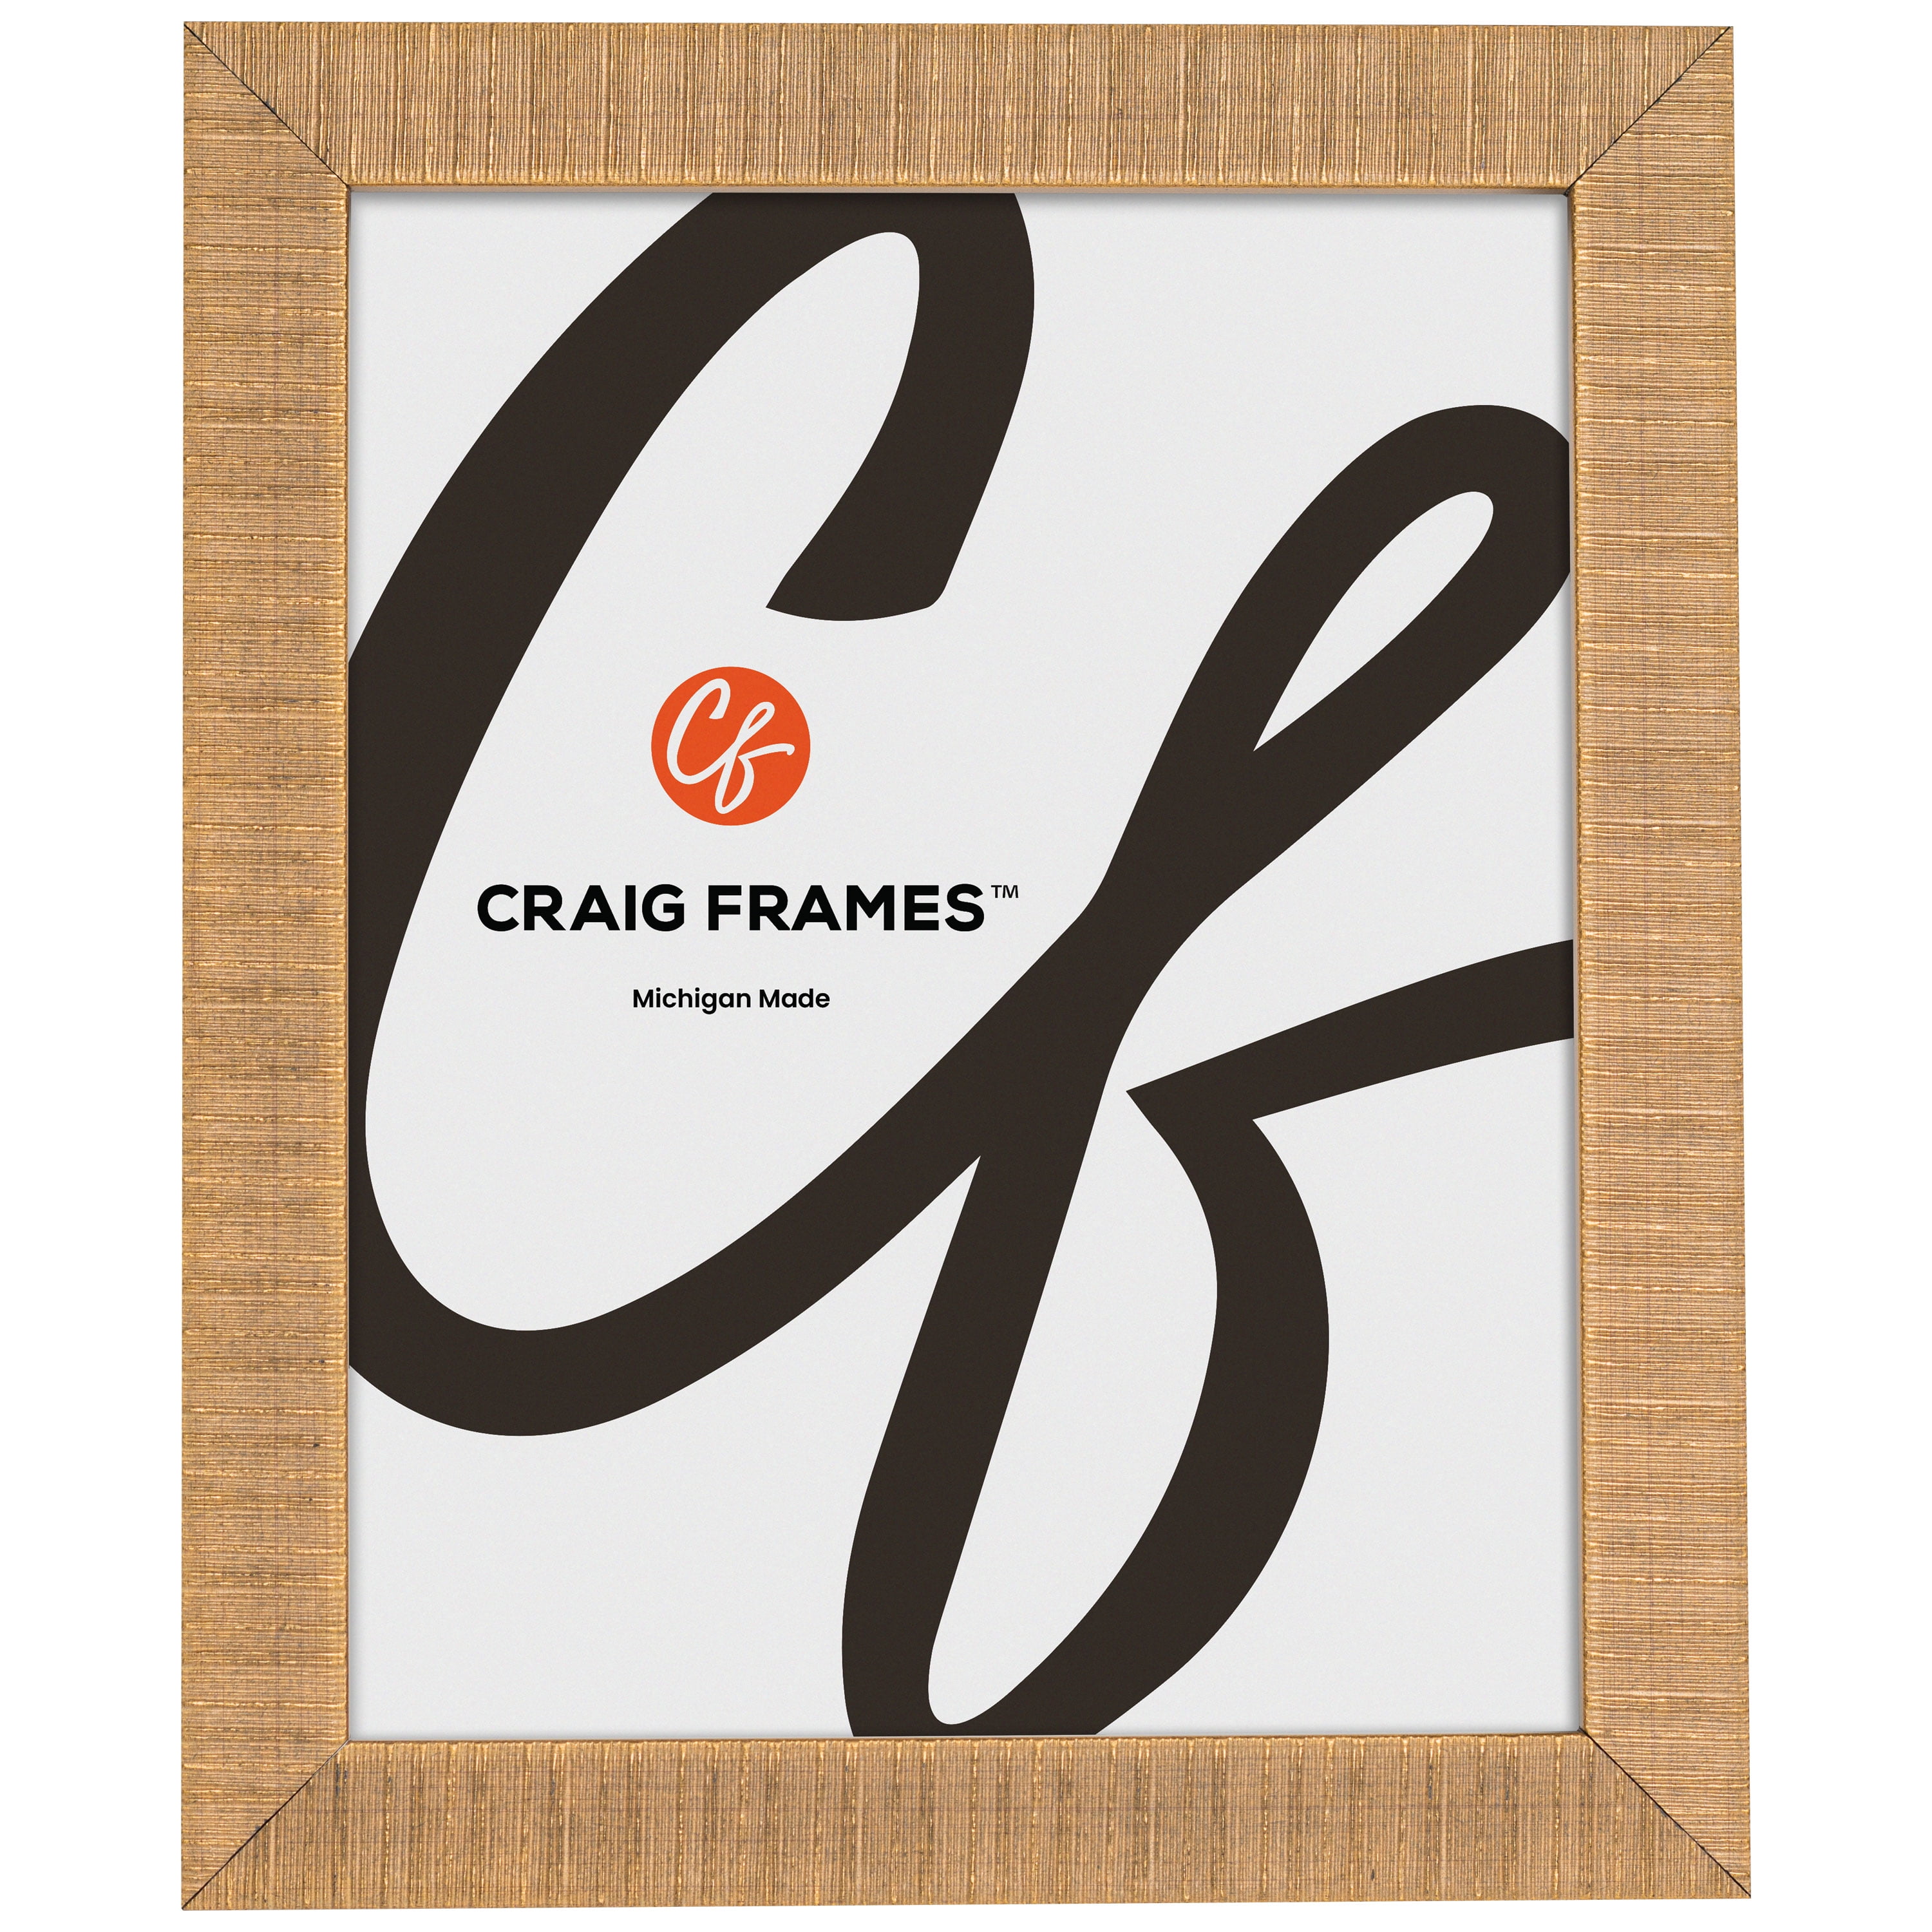 CustomPictureFrames.com 12x14 Frame Gold Real Wood Picture Frame Width 1.5 Inches | Interior Frame Depth 0.5 Inches | Bhutan Bamboo Photo Frame